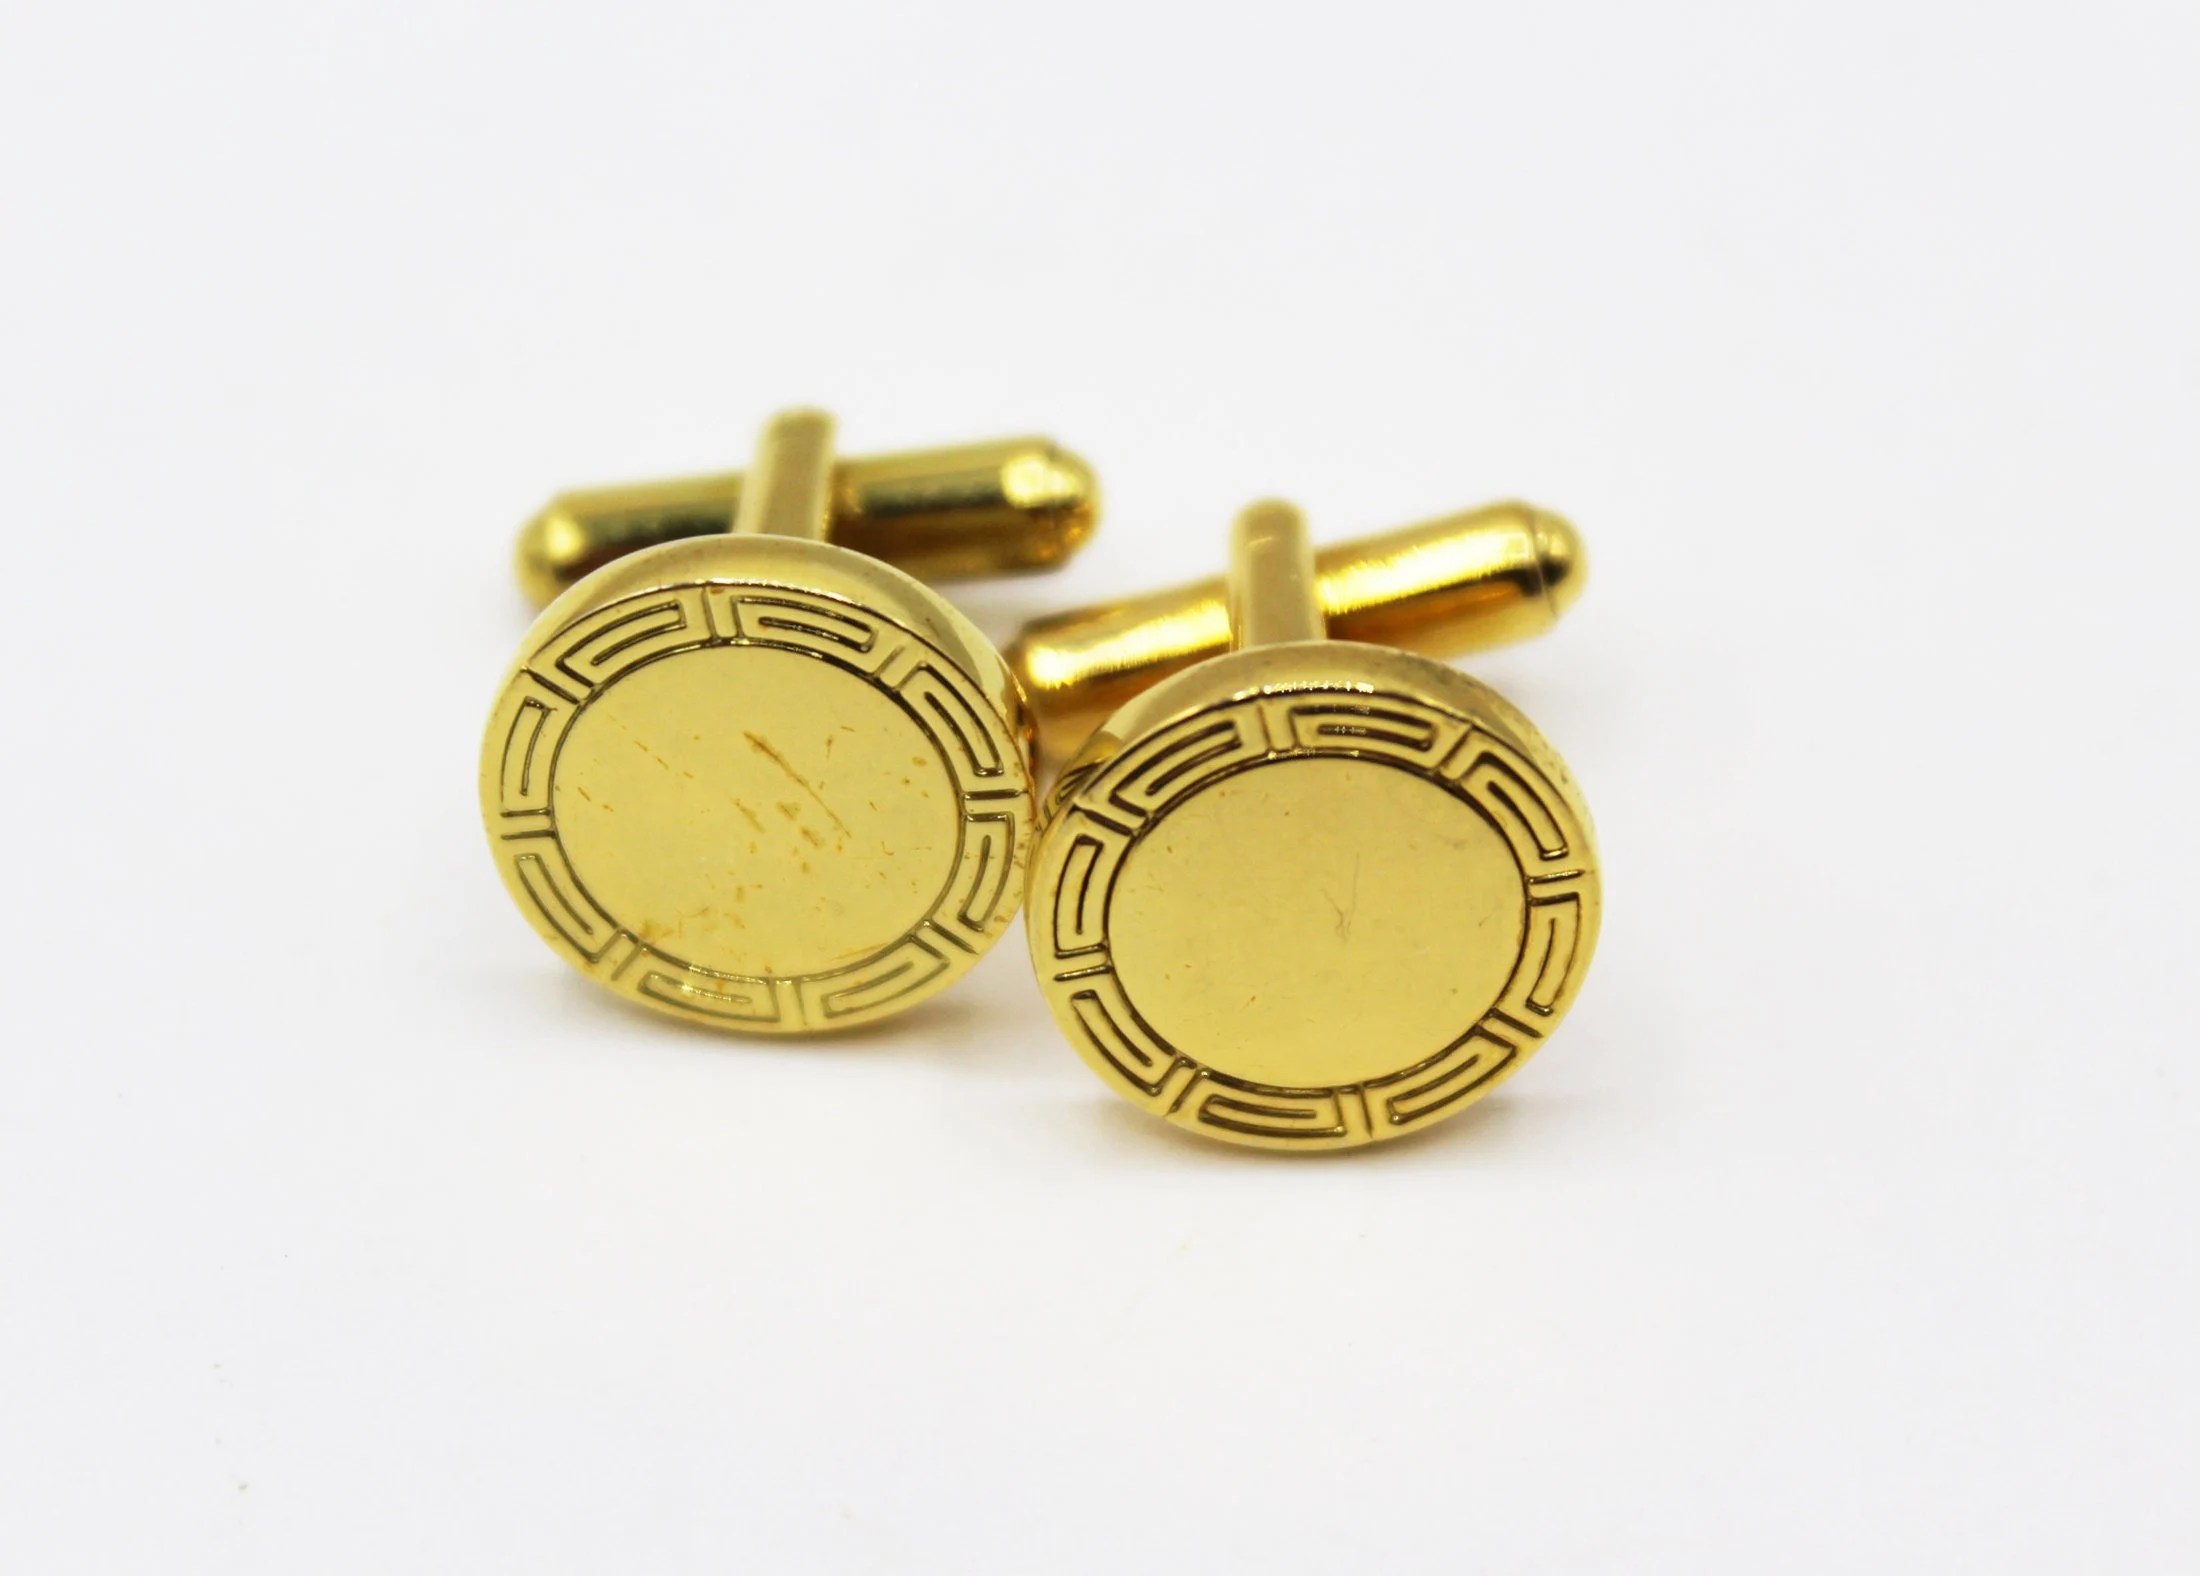 Shiny Gold Tone Chinese Boarder Mens Cufflinks - Vintage, MCM, Mid Century, Retro, Asian, Classic, Business, Office, Cuff Links